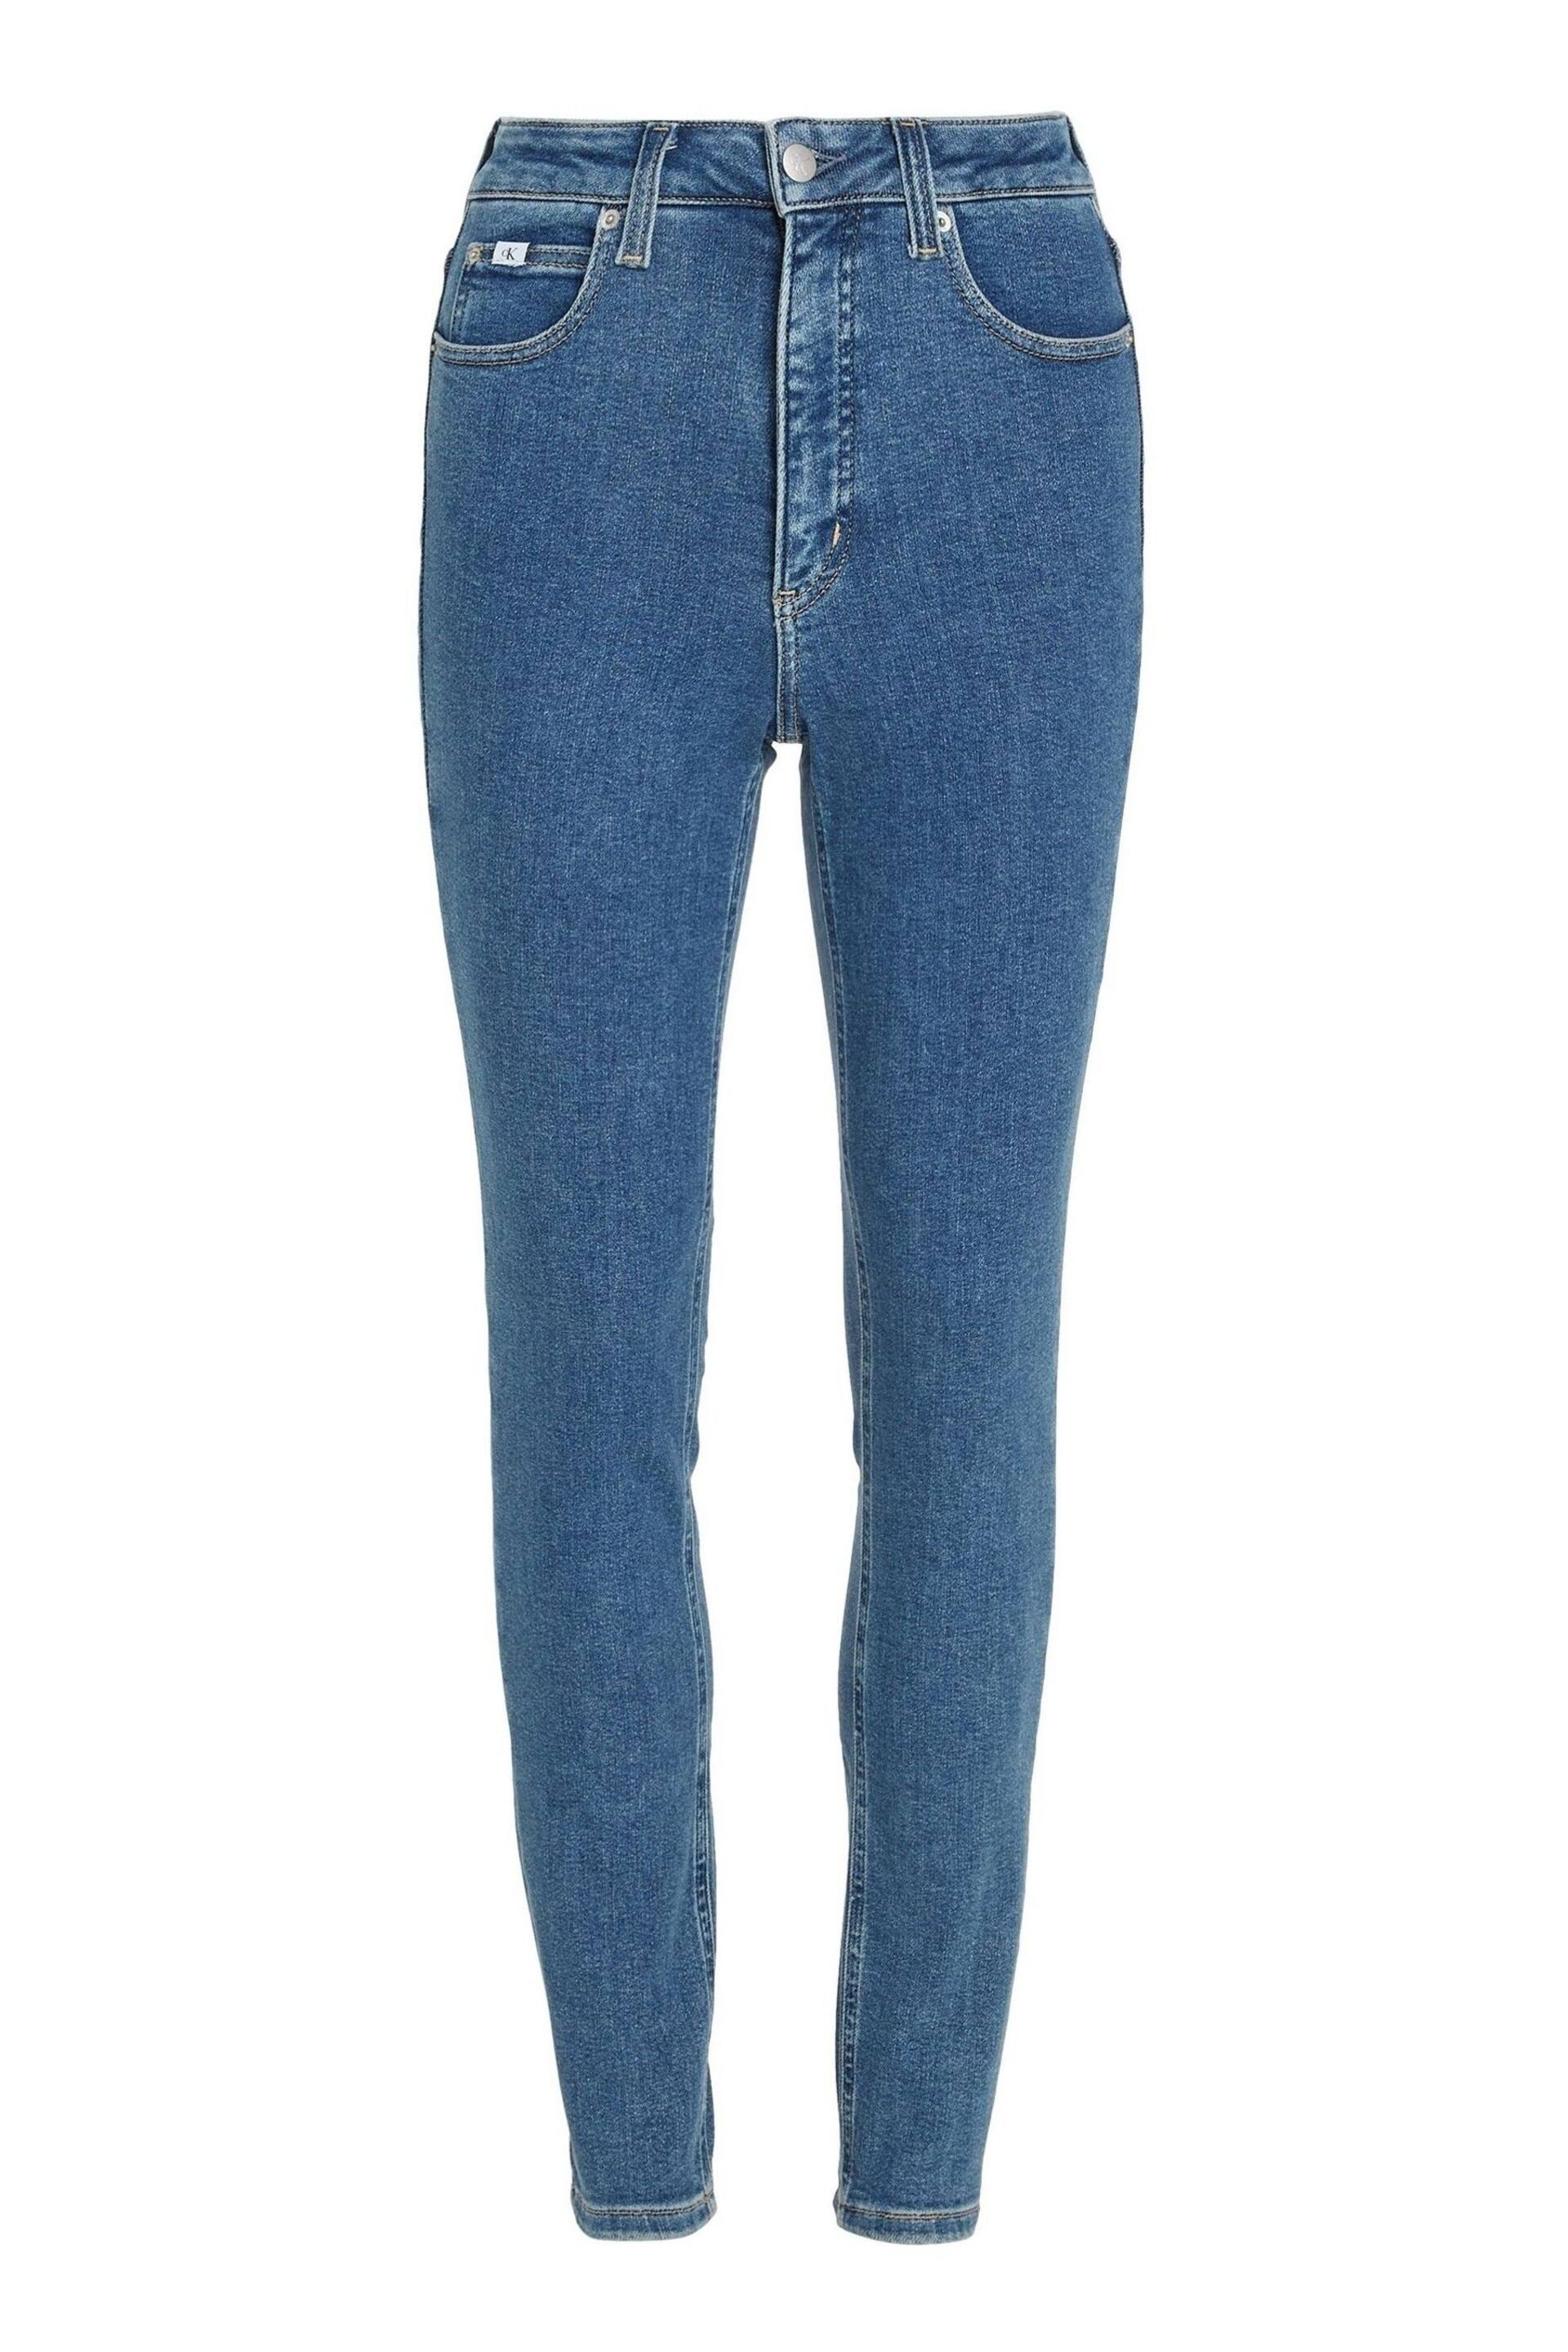 Calvin Klein Jeans High Rise Skinny Jeans - Image 4 of 6